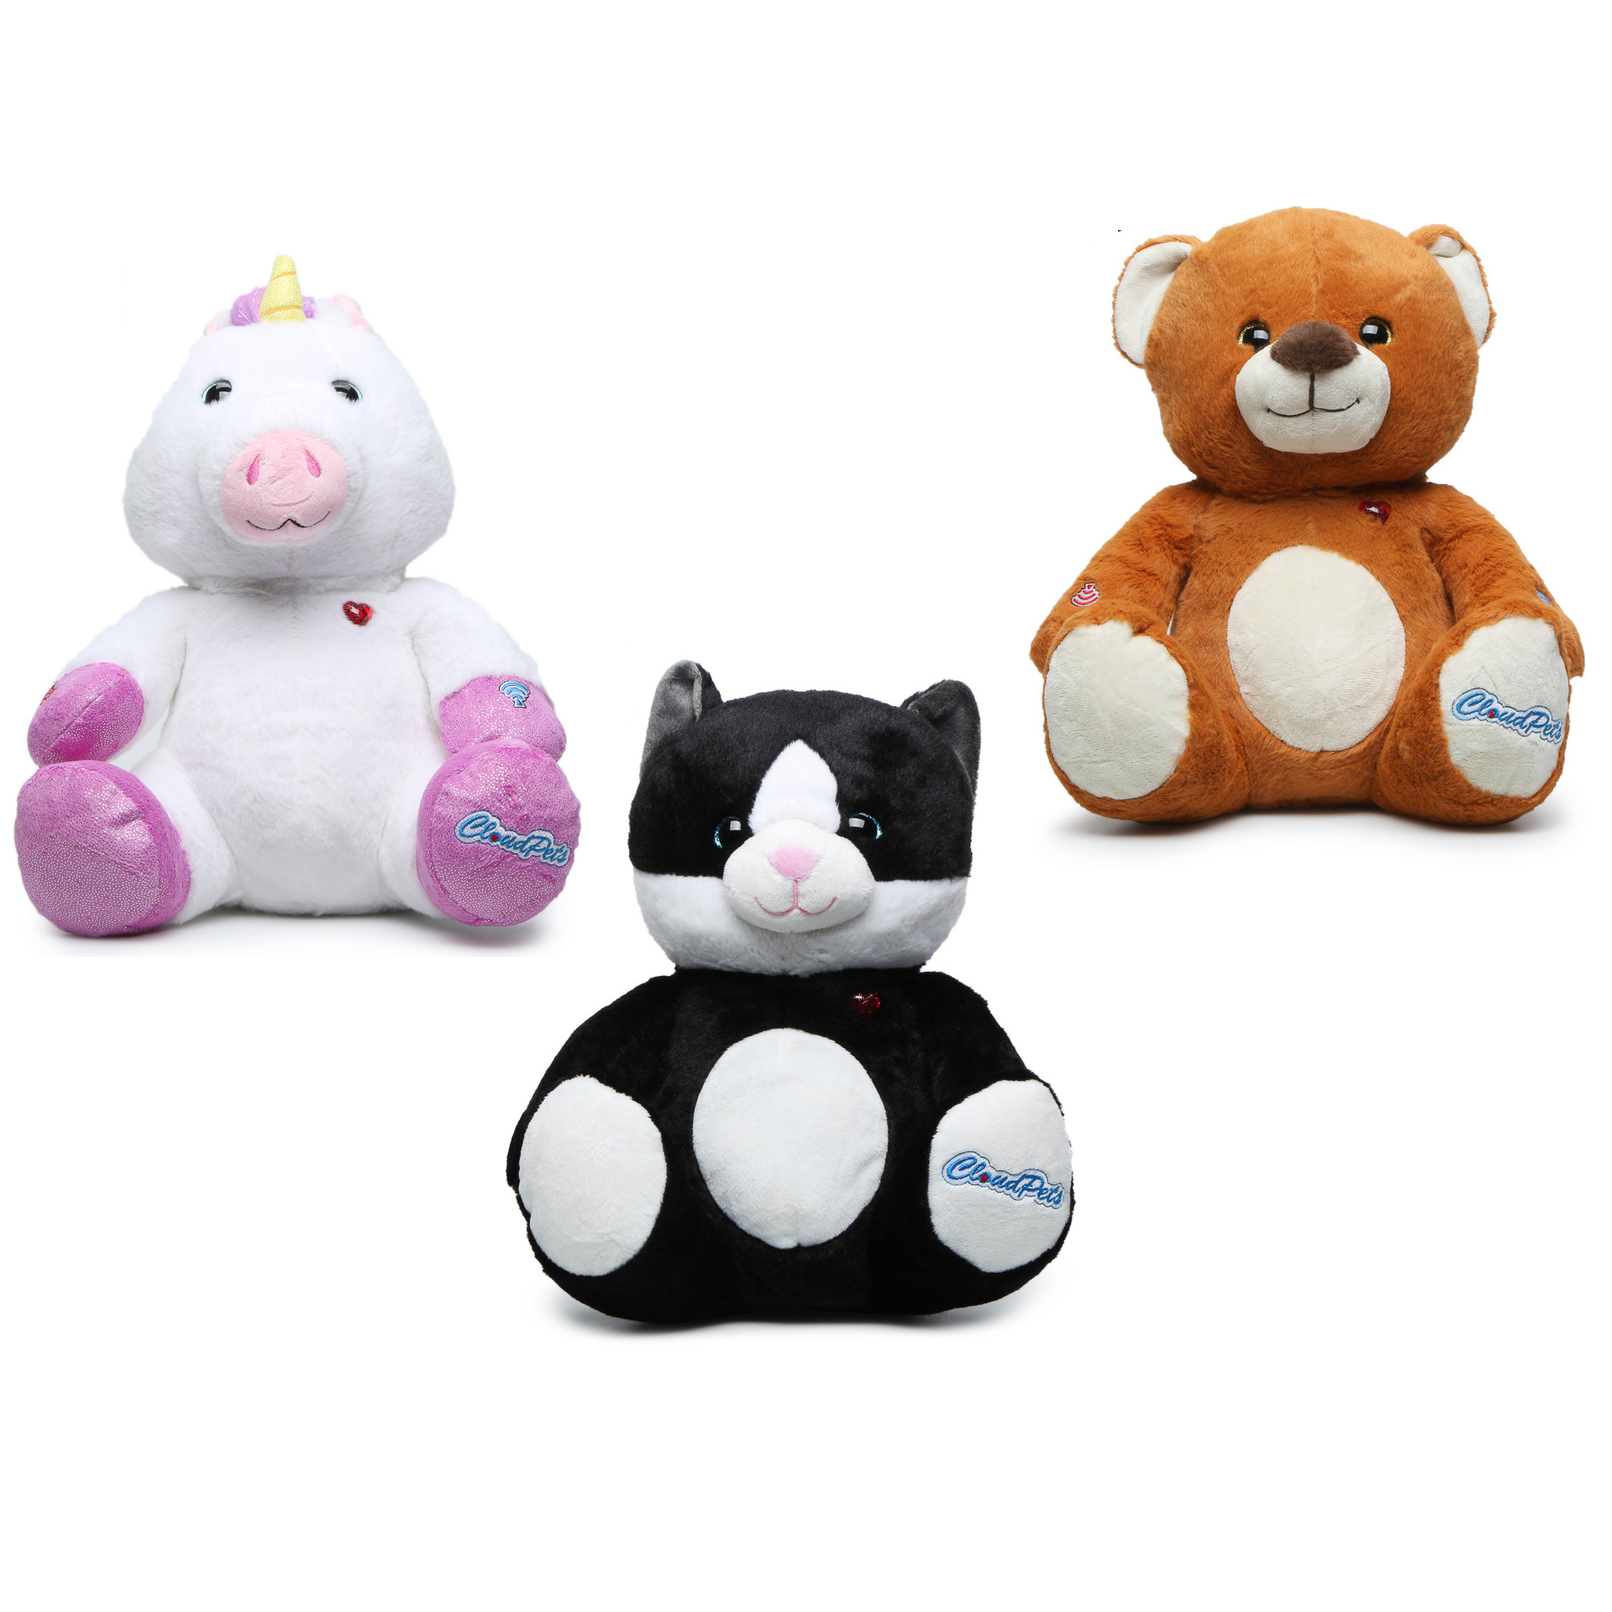 CloudPets WiFi Enabled Plush Toys as Little as $5.60 Each at Hollar! (Reg $28.88)